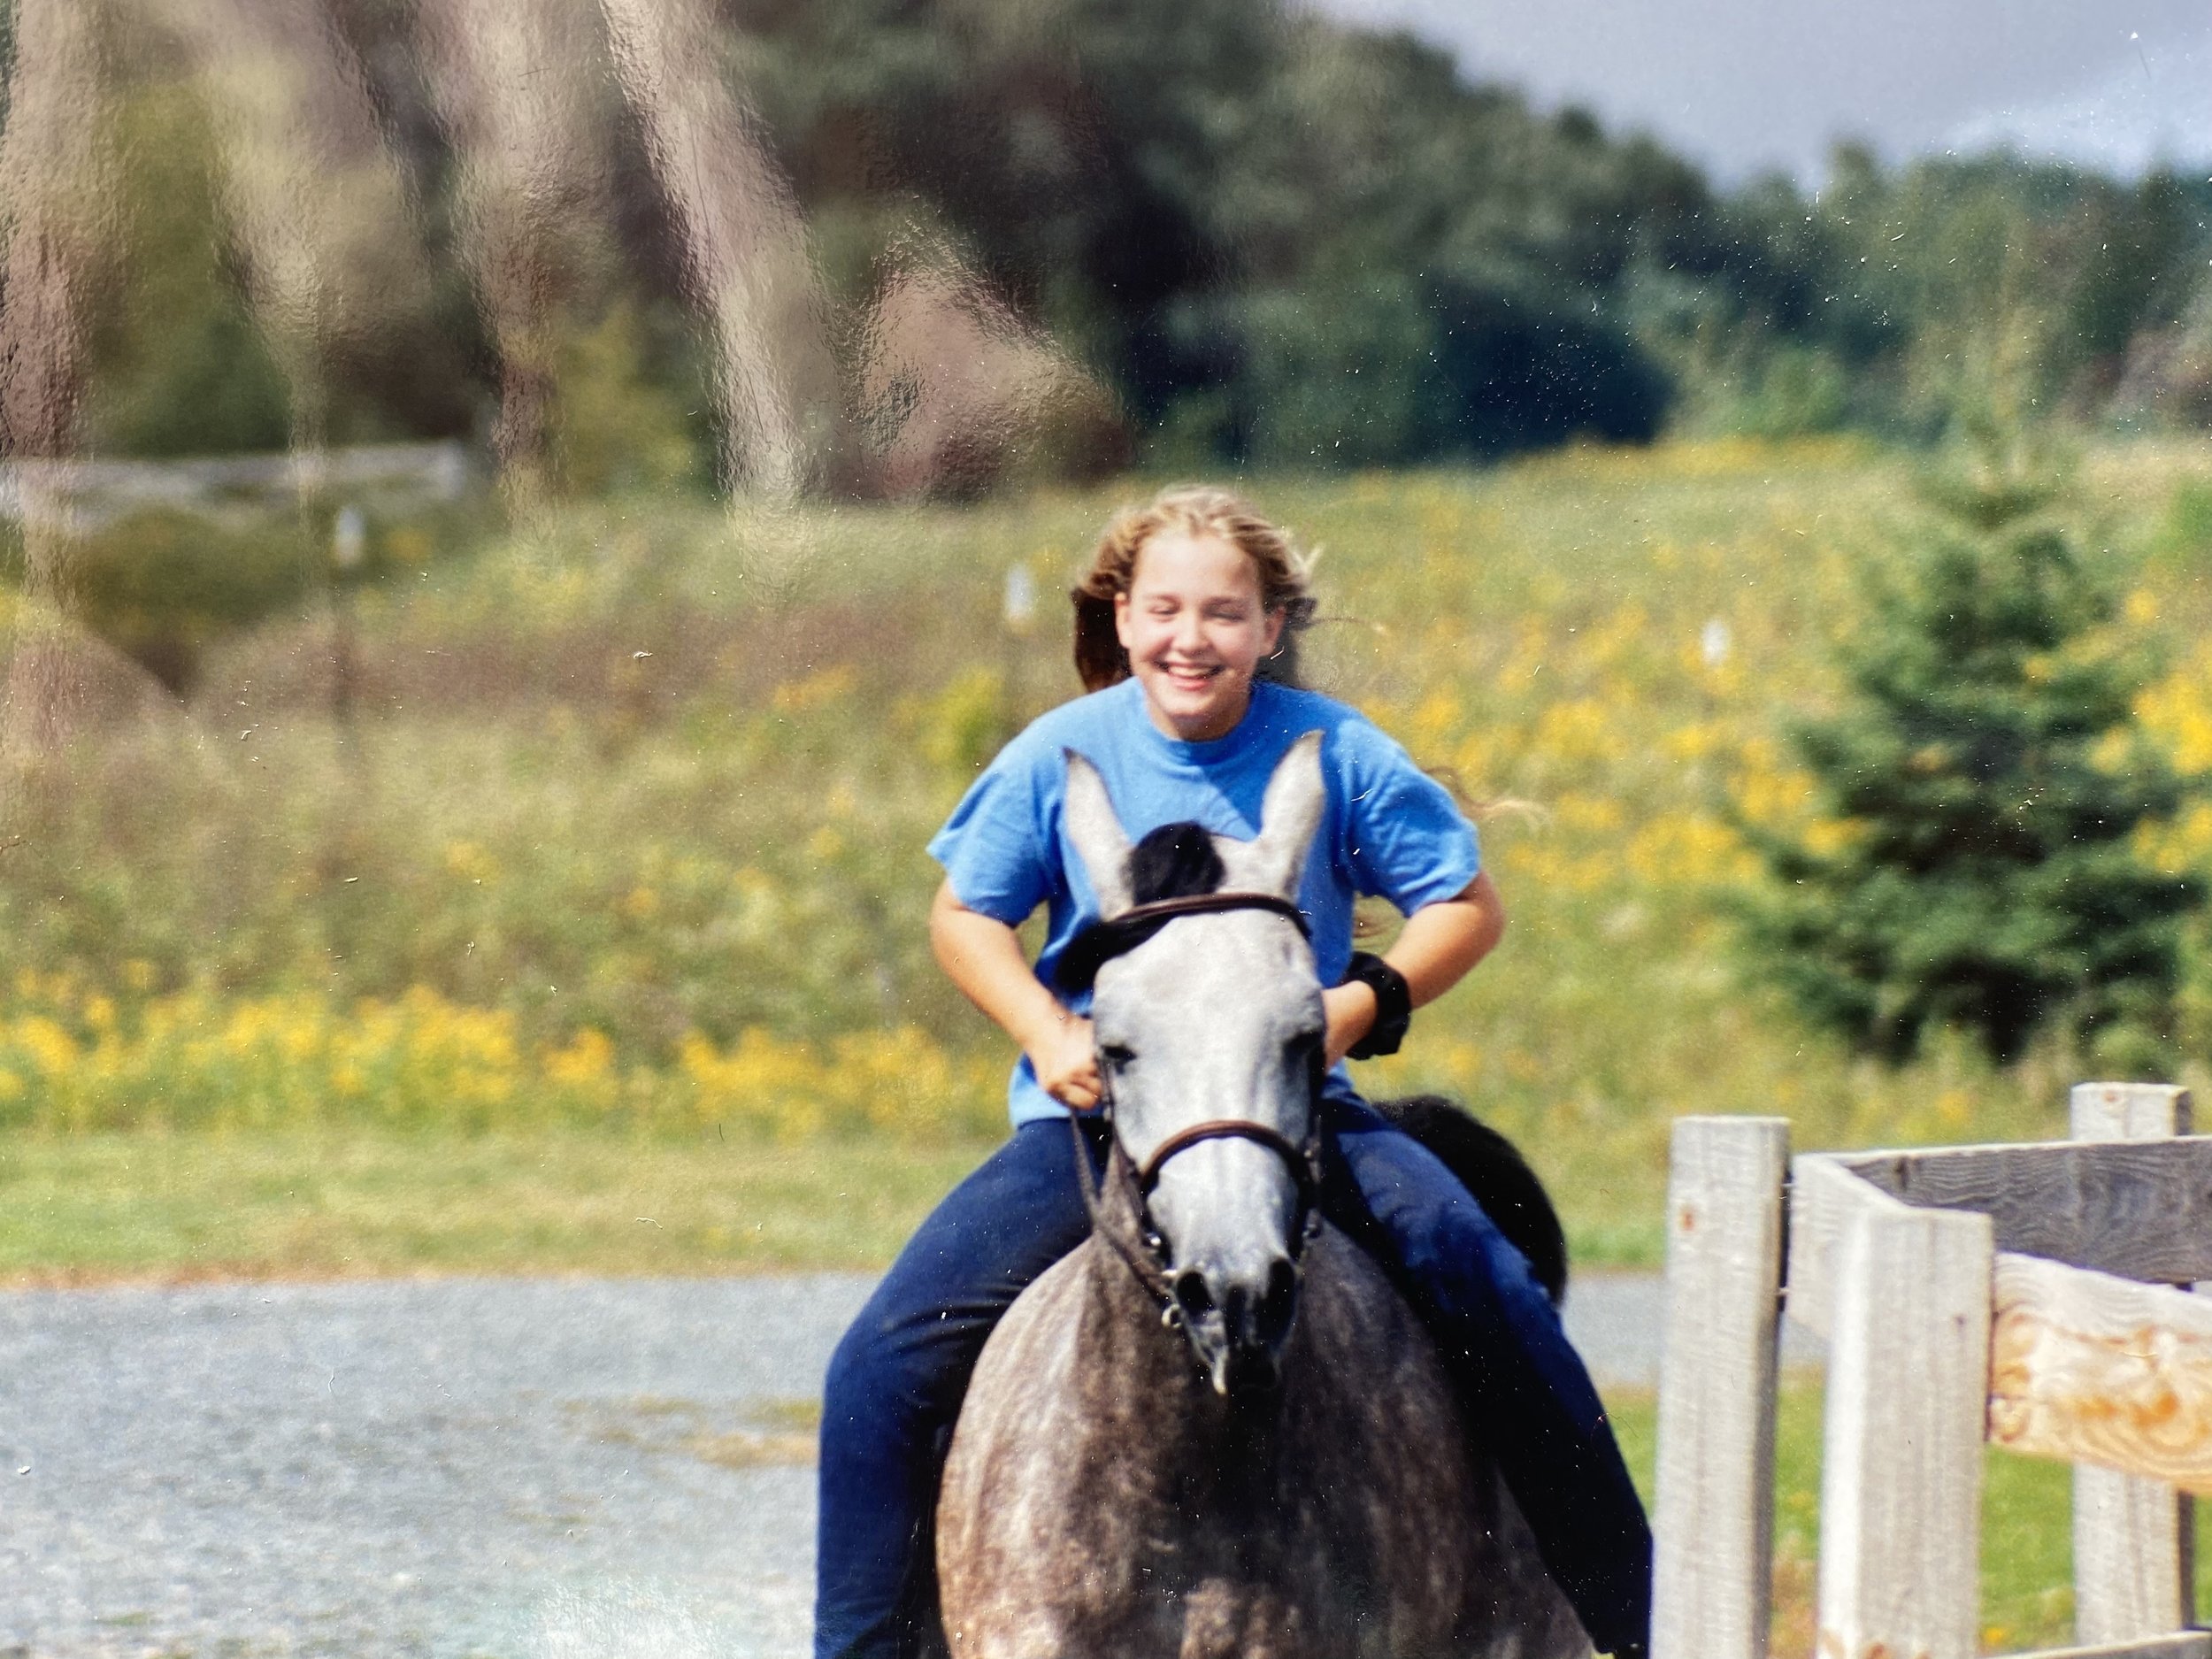 A young Brooke riding a horse on bareback